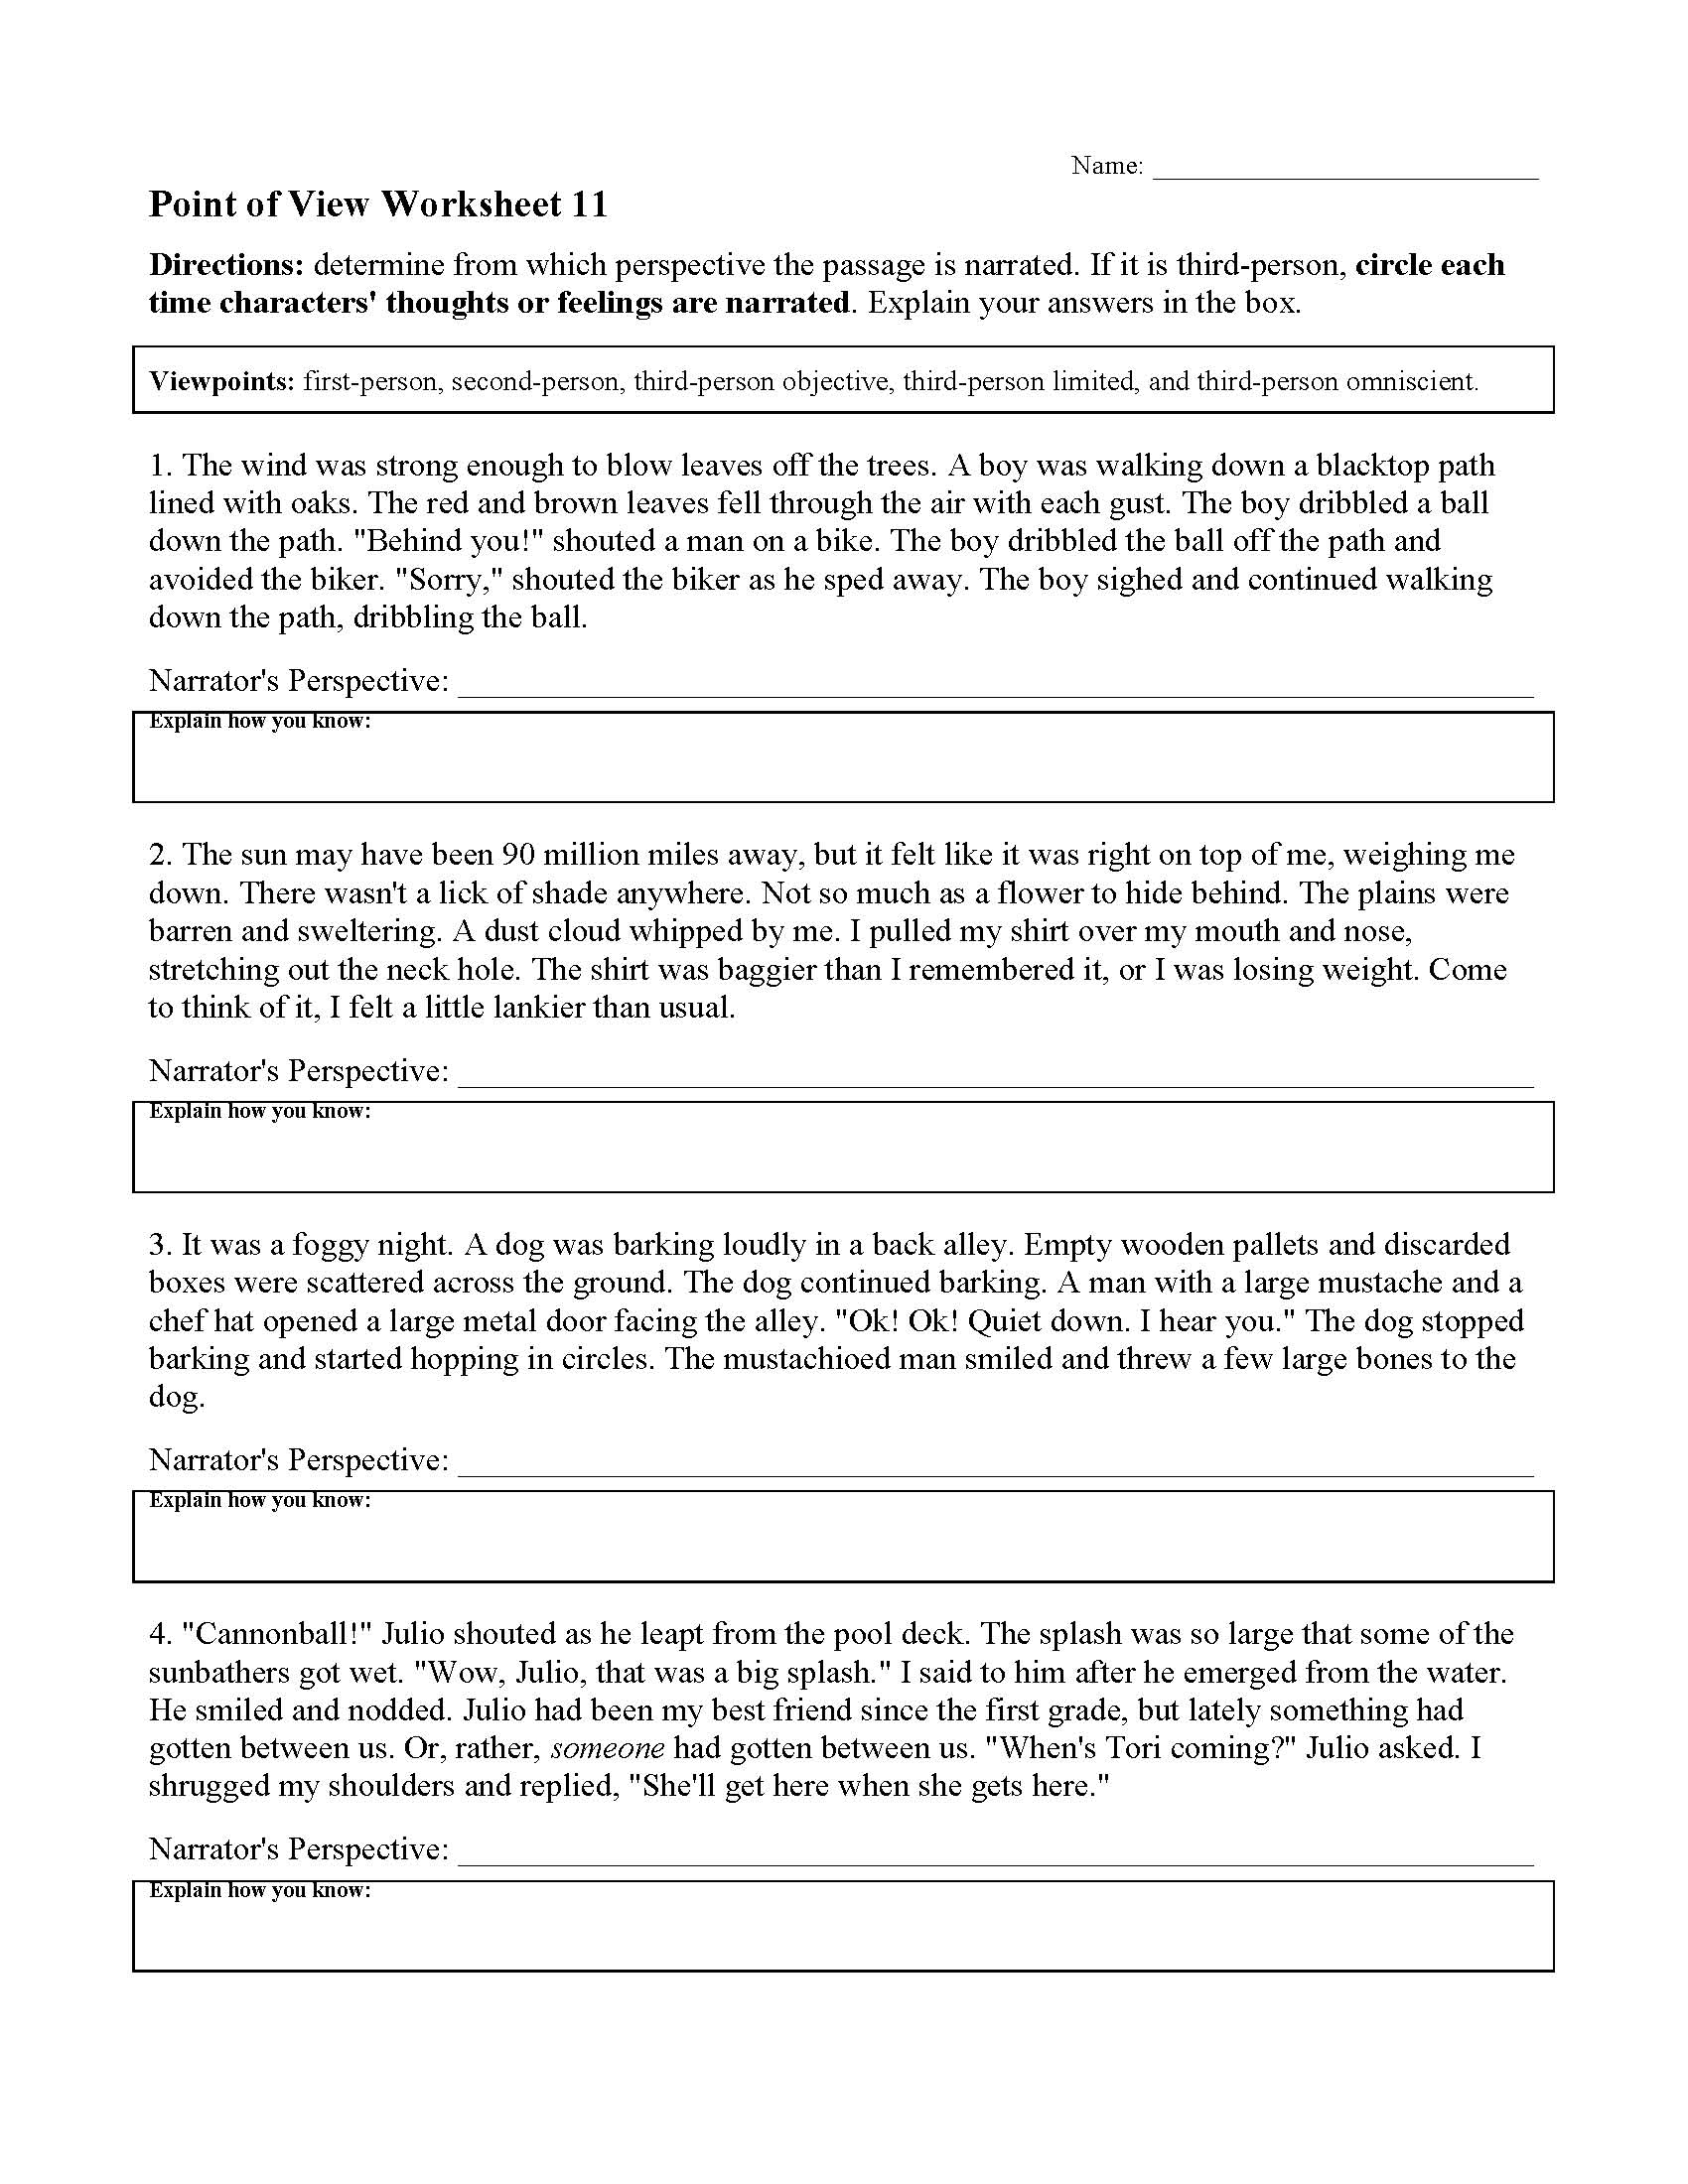 point-of-view-worksheet-11-preview